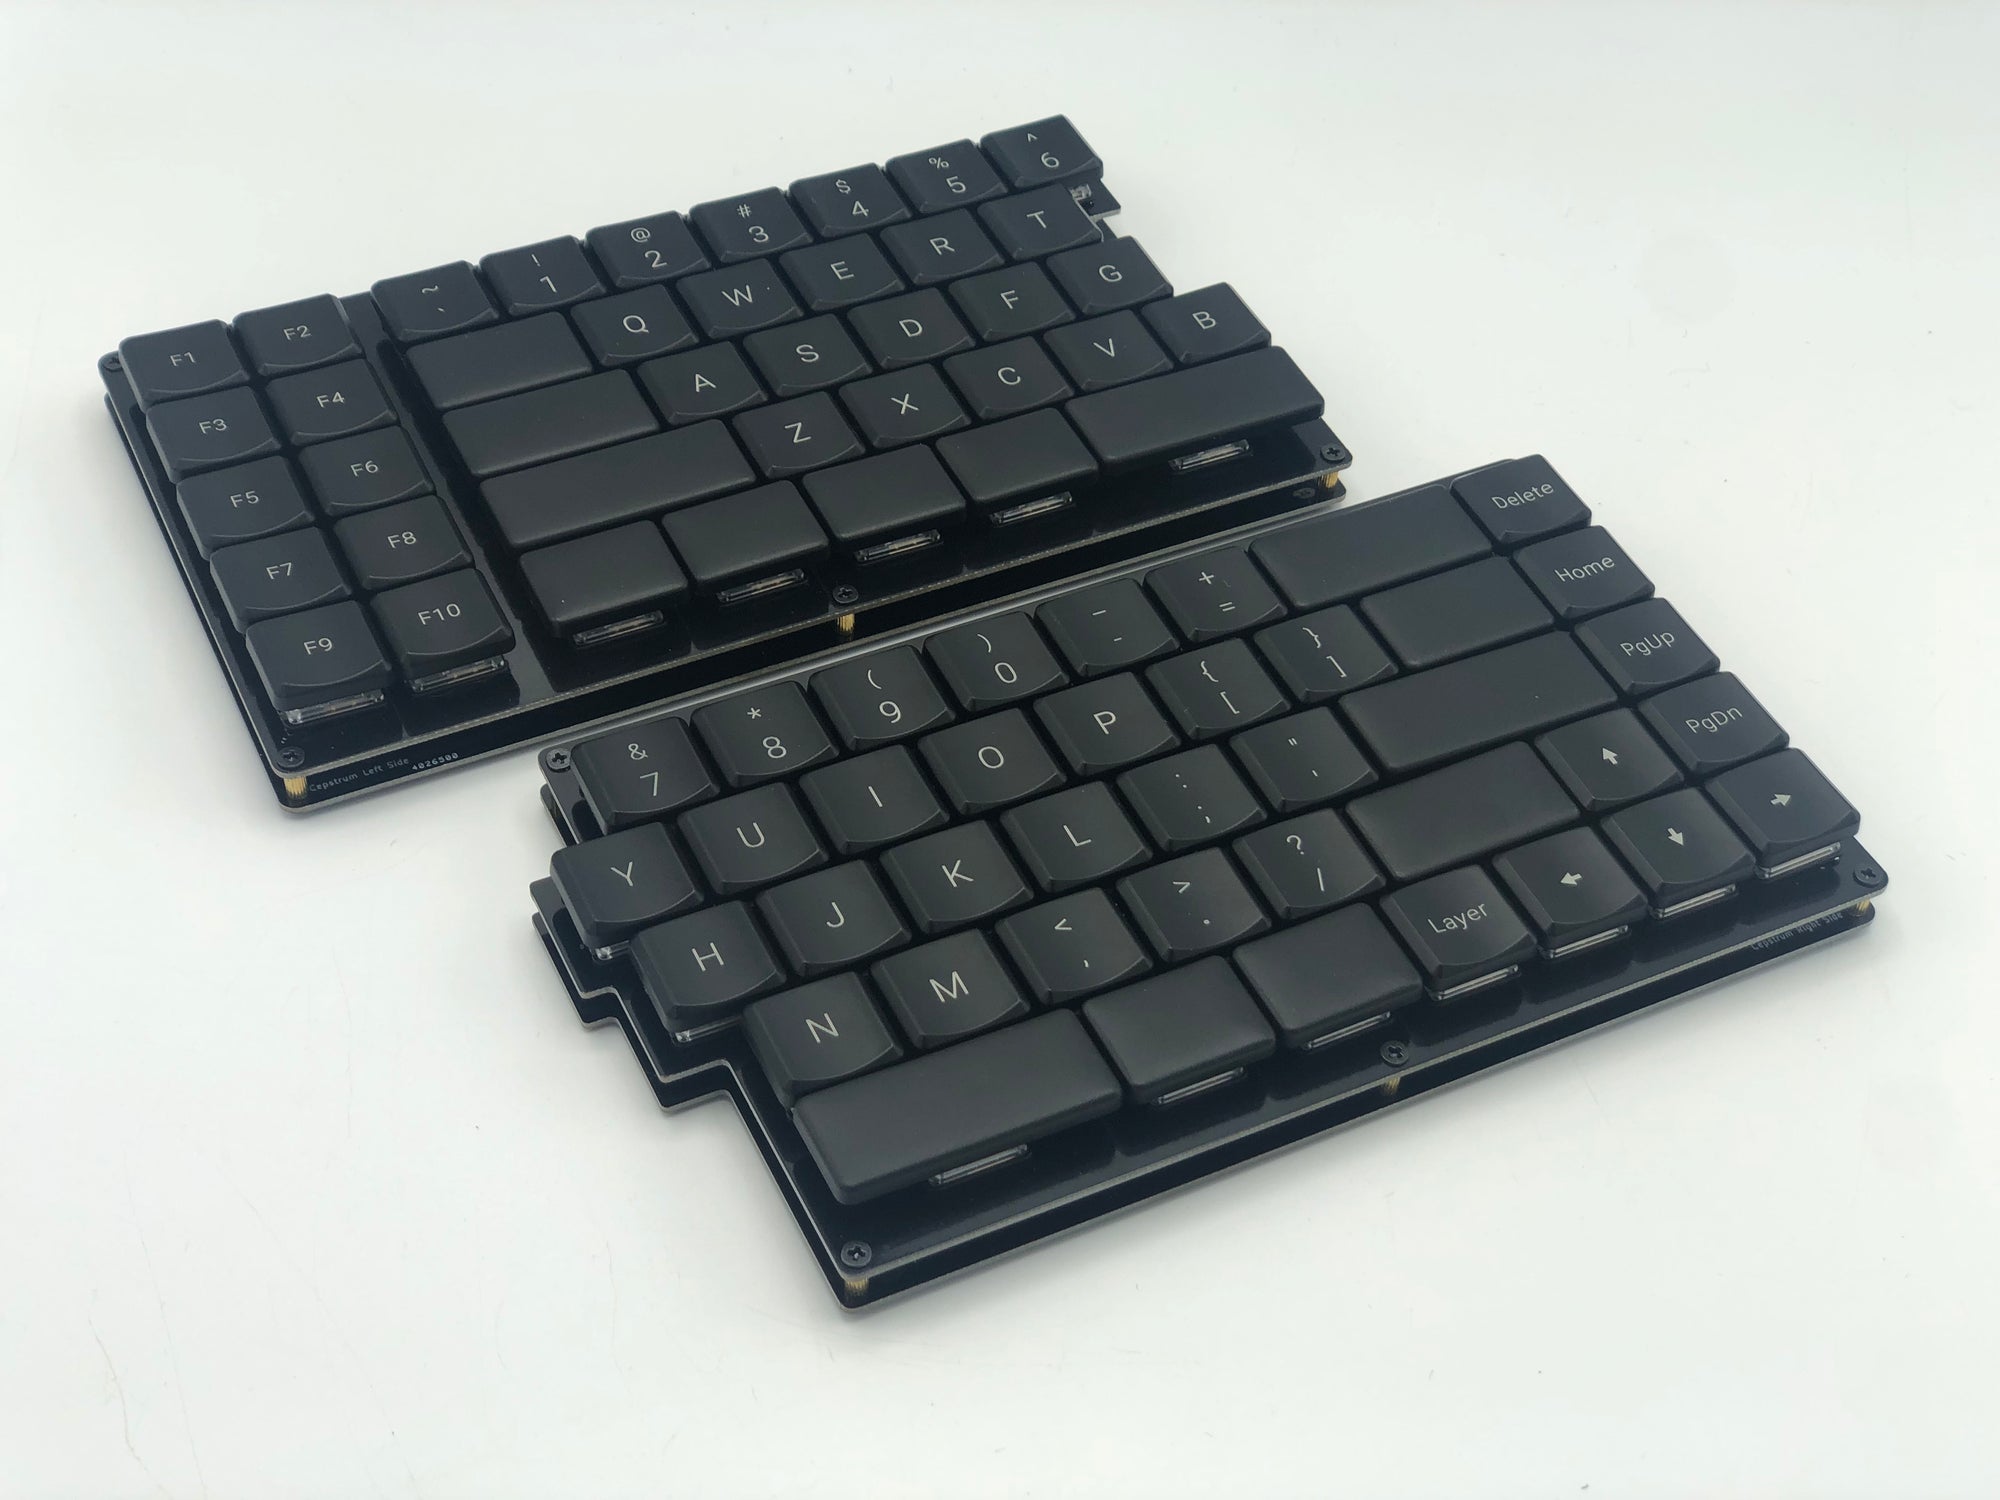 Fully built Cepstrum keyboard with the left-hand macro section and black keycaps.